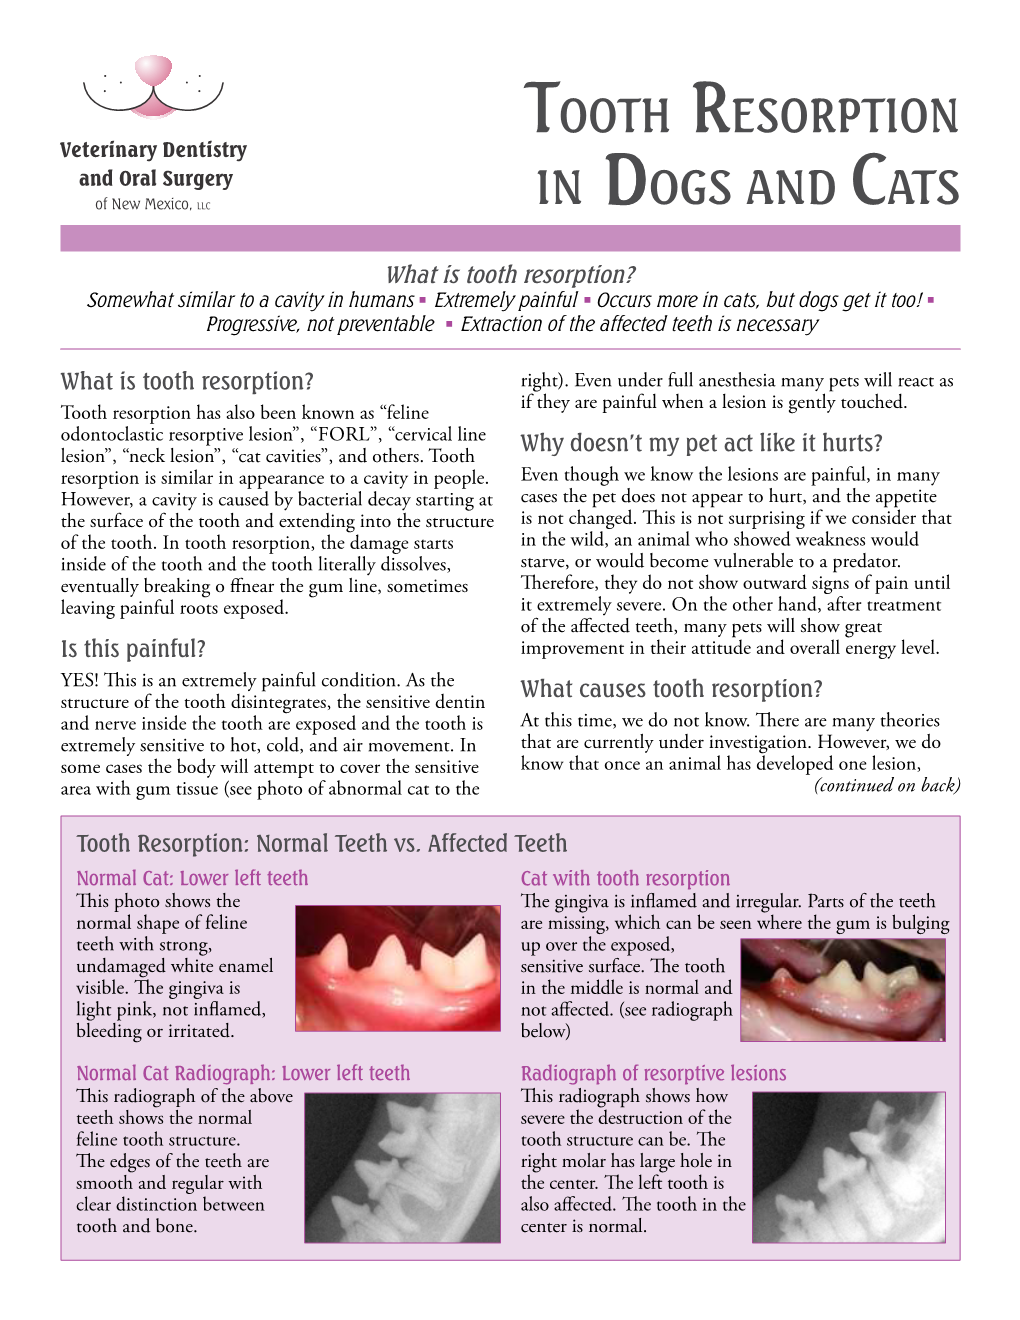 Tooth Resorption in Dogs and Cats